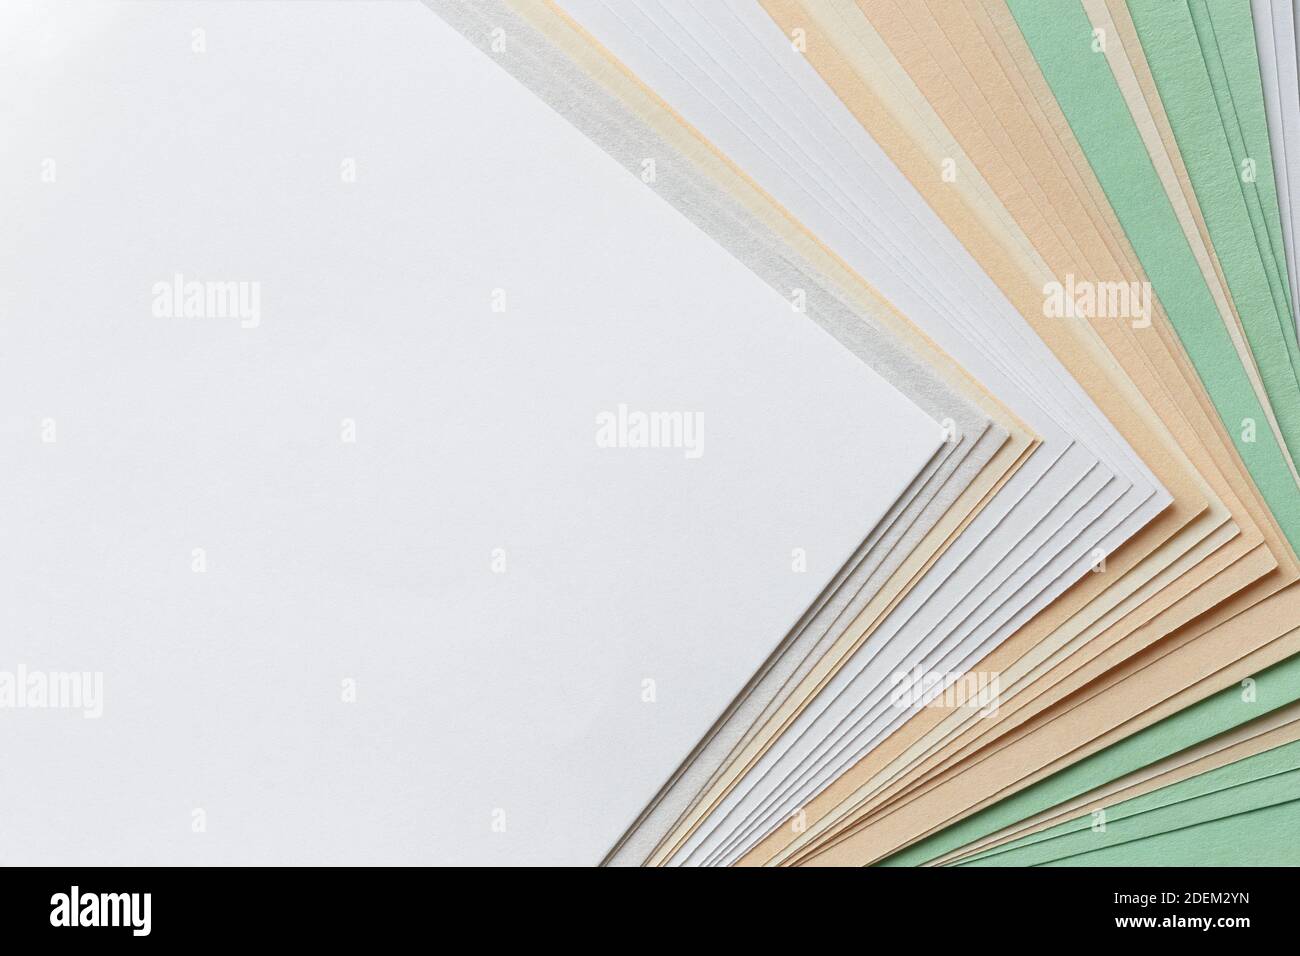 Abstract background of lined with corner pieces of paper for notes, with free space for text Stock Photo